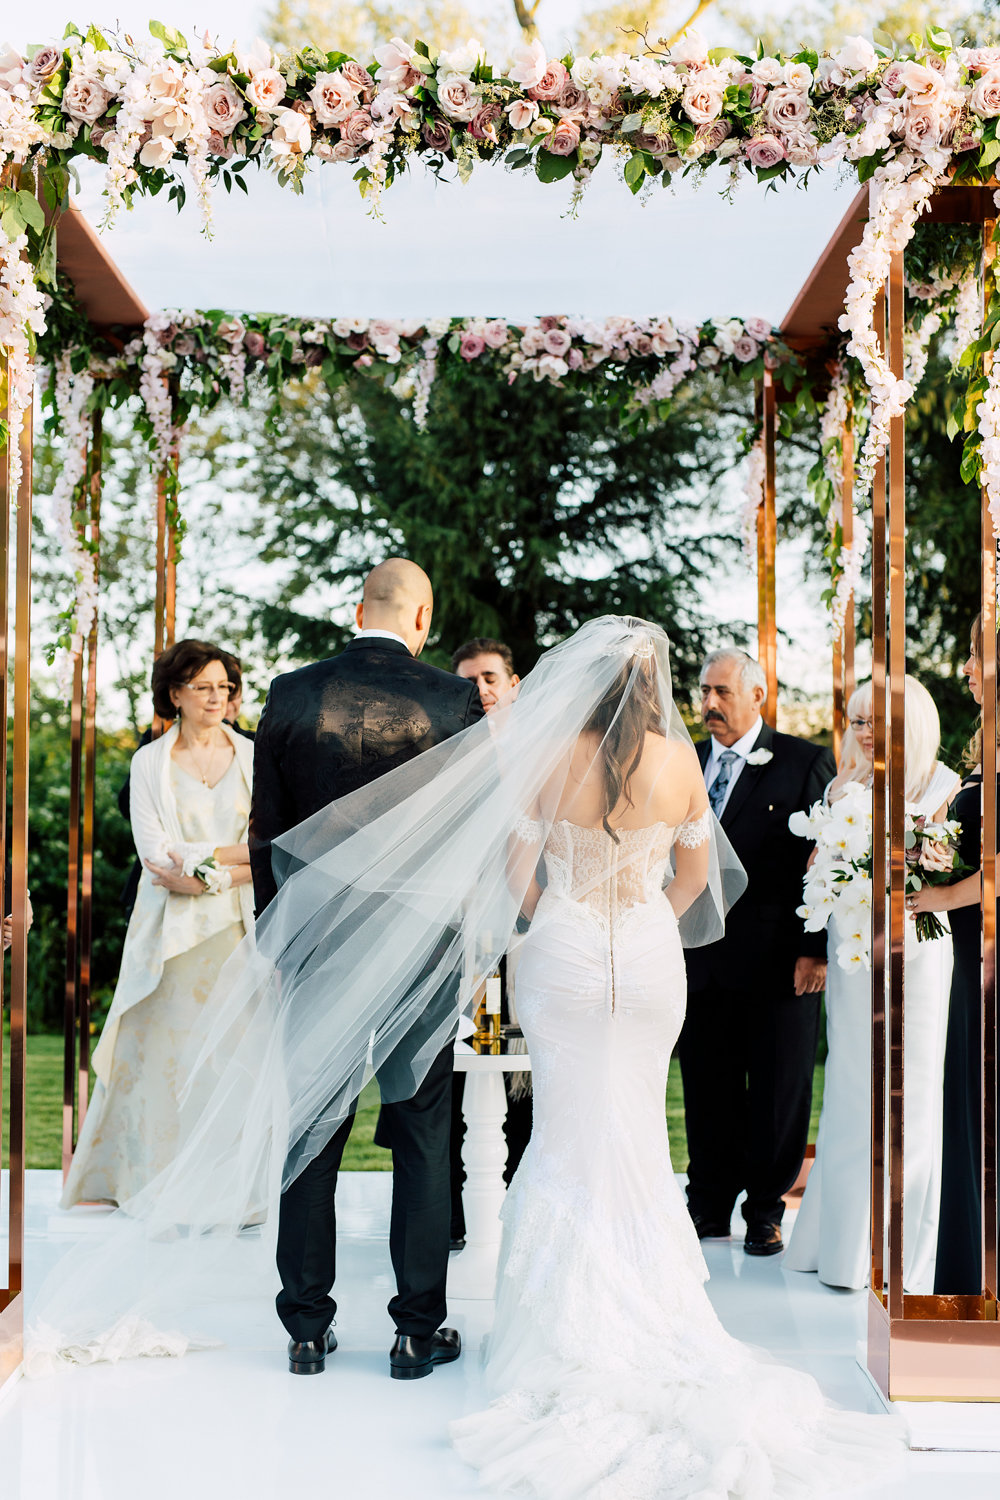 Outdoor wedding ceremony with pink roses